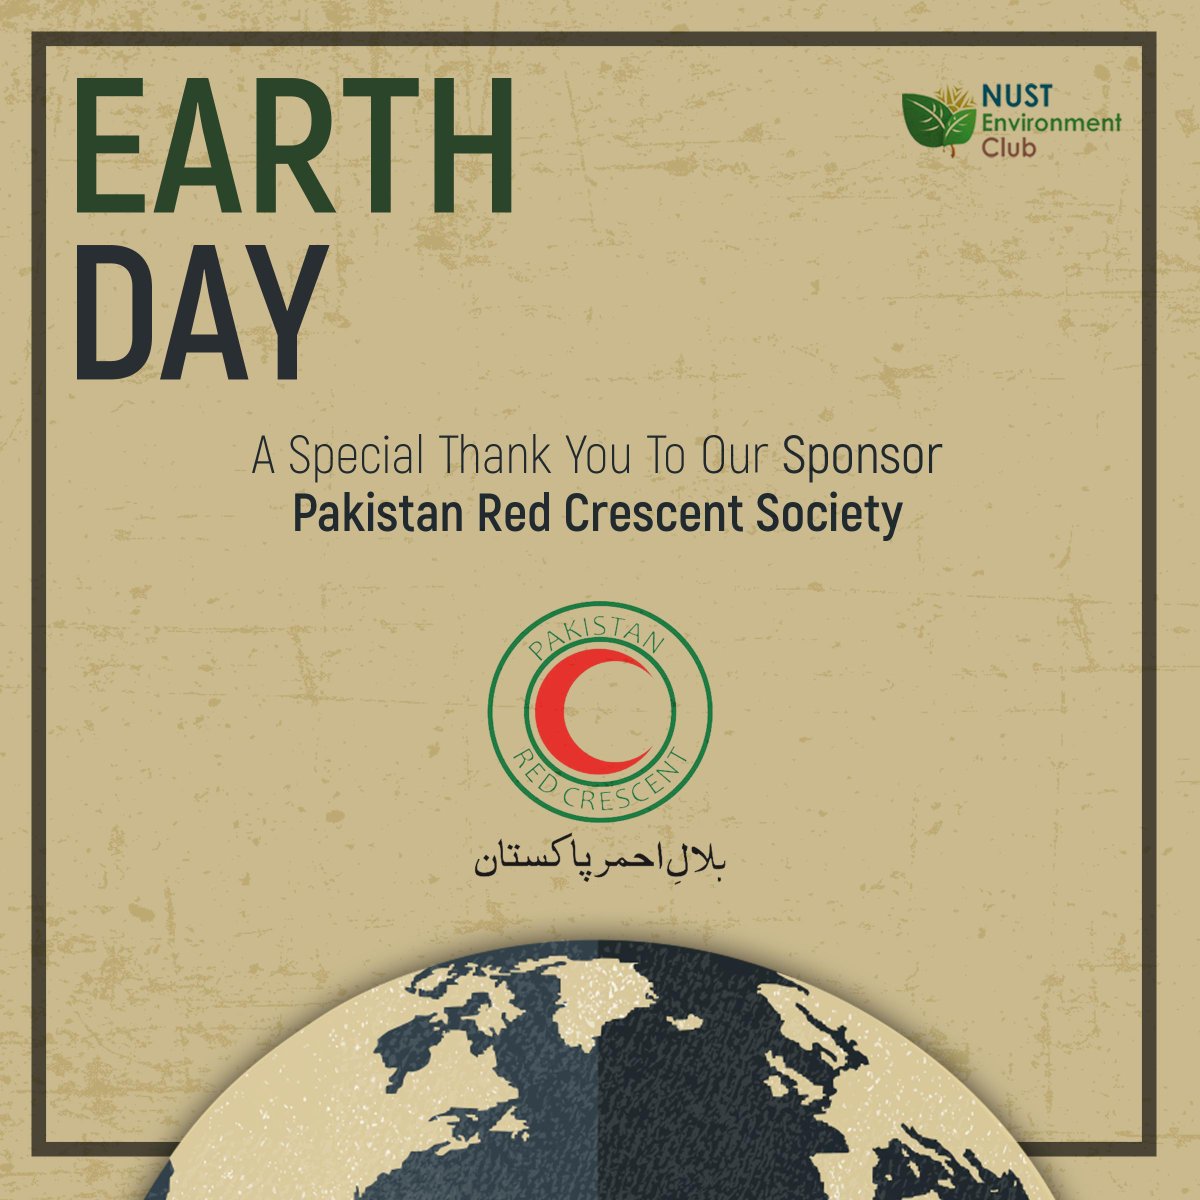 We at NEC would like to thank our exclusive partner, #PRCS for sponsoring our Earth Day Event.

With such valuable collaborations, we hope to generate even greater public awareness on the importance of being environment-friendly!

#EarthDay #OwnYourEnvironment #NEC